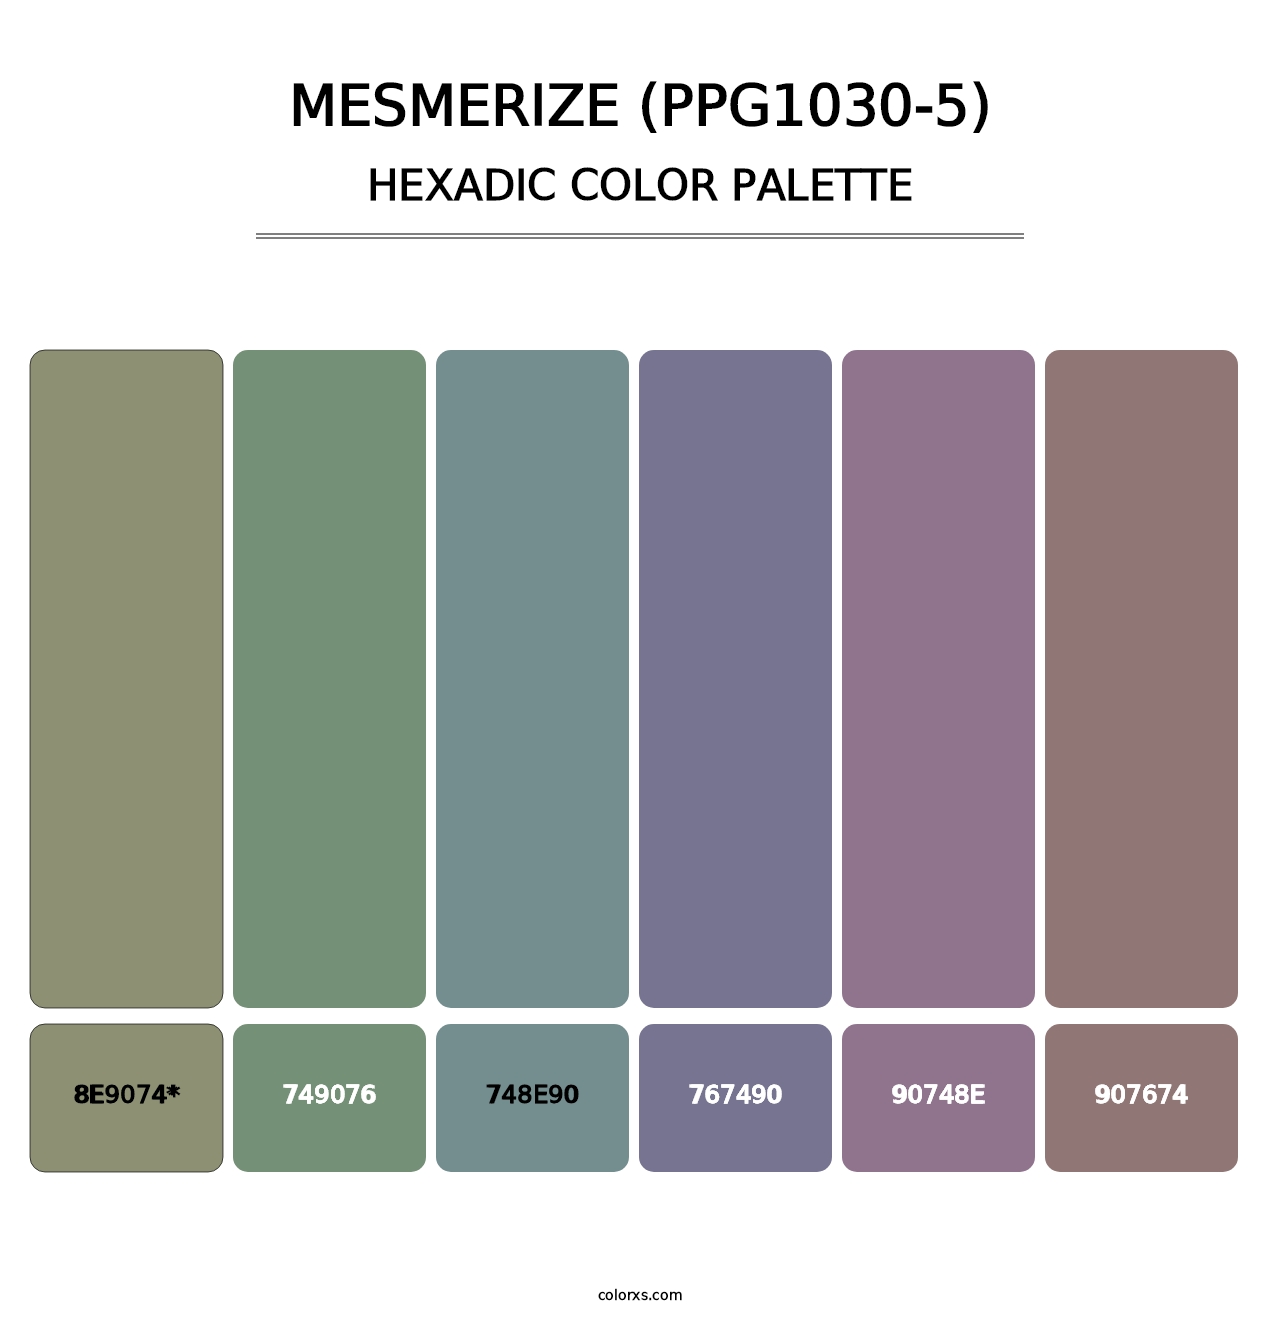 Mesmerize (PPG1030-5) - Hexadic Color Palette